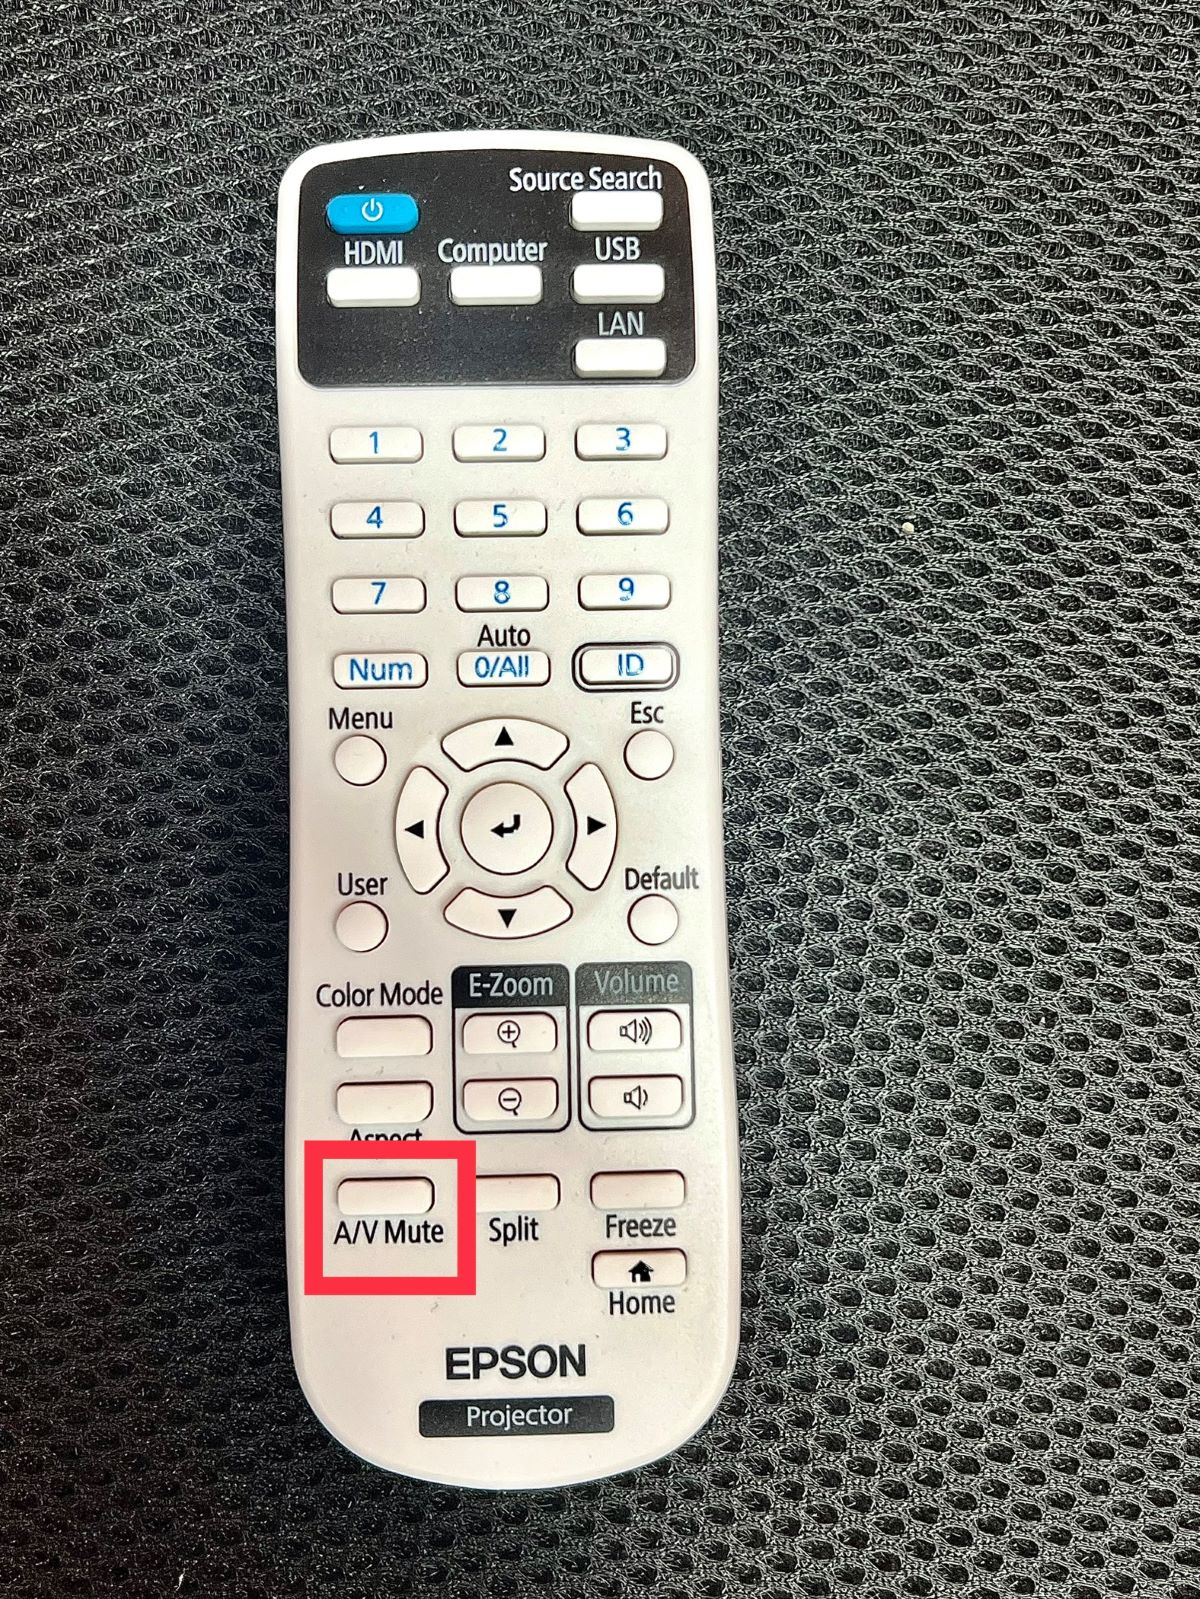 av mute button of an epson projector is highlighted